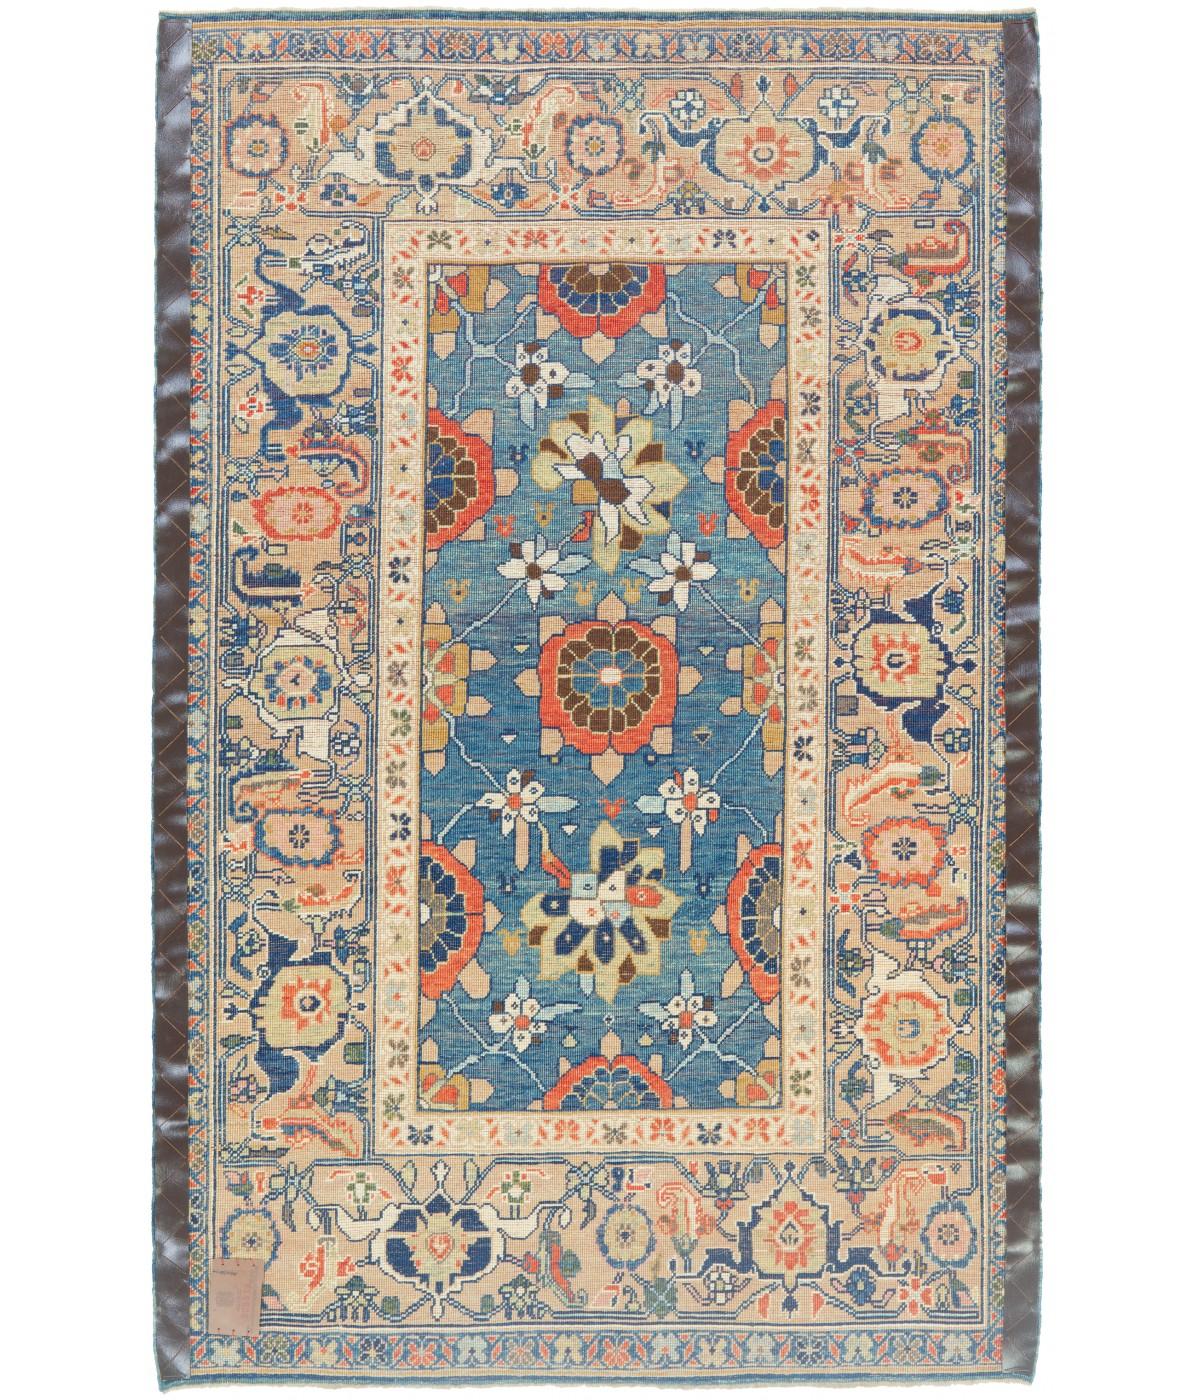 The source of the rug comes from the book Antique Rugs of Kurdistan A Historical Legacy of Woven Art, James D. Burns, 2002 nr.4. This was an exclusive example of a Mina Khani lattice design mid-19th century rug from Koliya'i, Southern Kurdistan